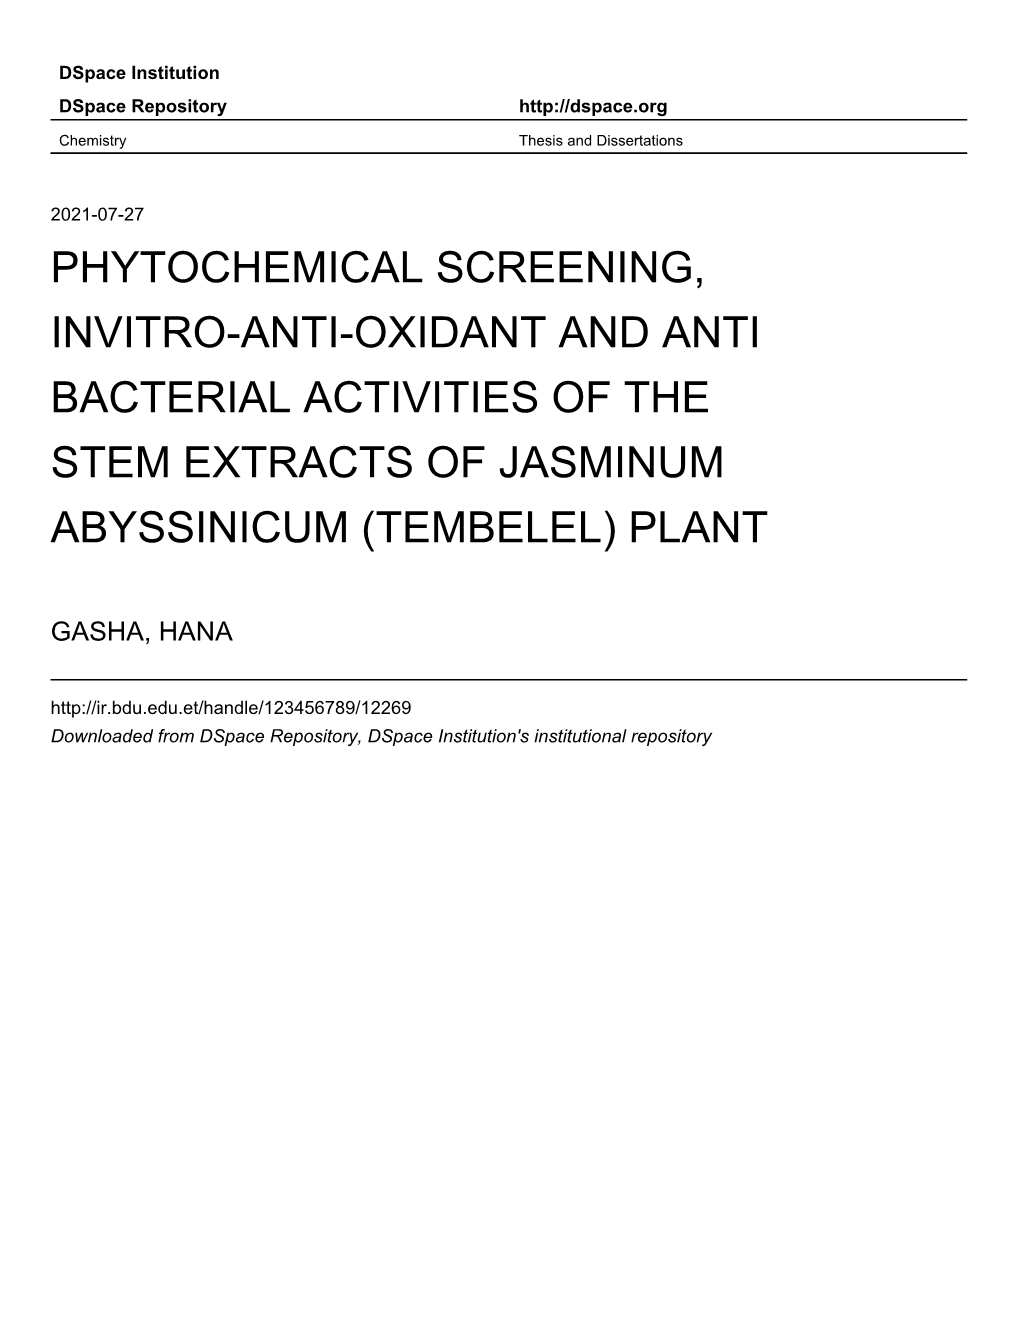 Phytochemical Screening, Invitro-Anti-Oxidant and Anti Bacterial Activities of the Stem Extracts of Jasminum Abyssinicum (Tembelel) Plant